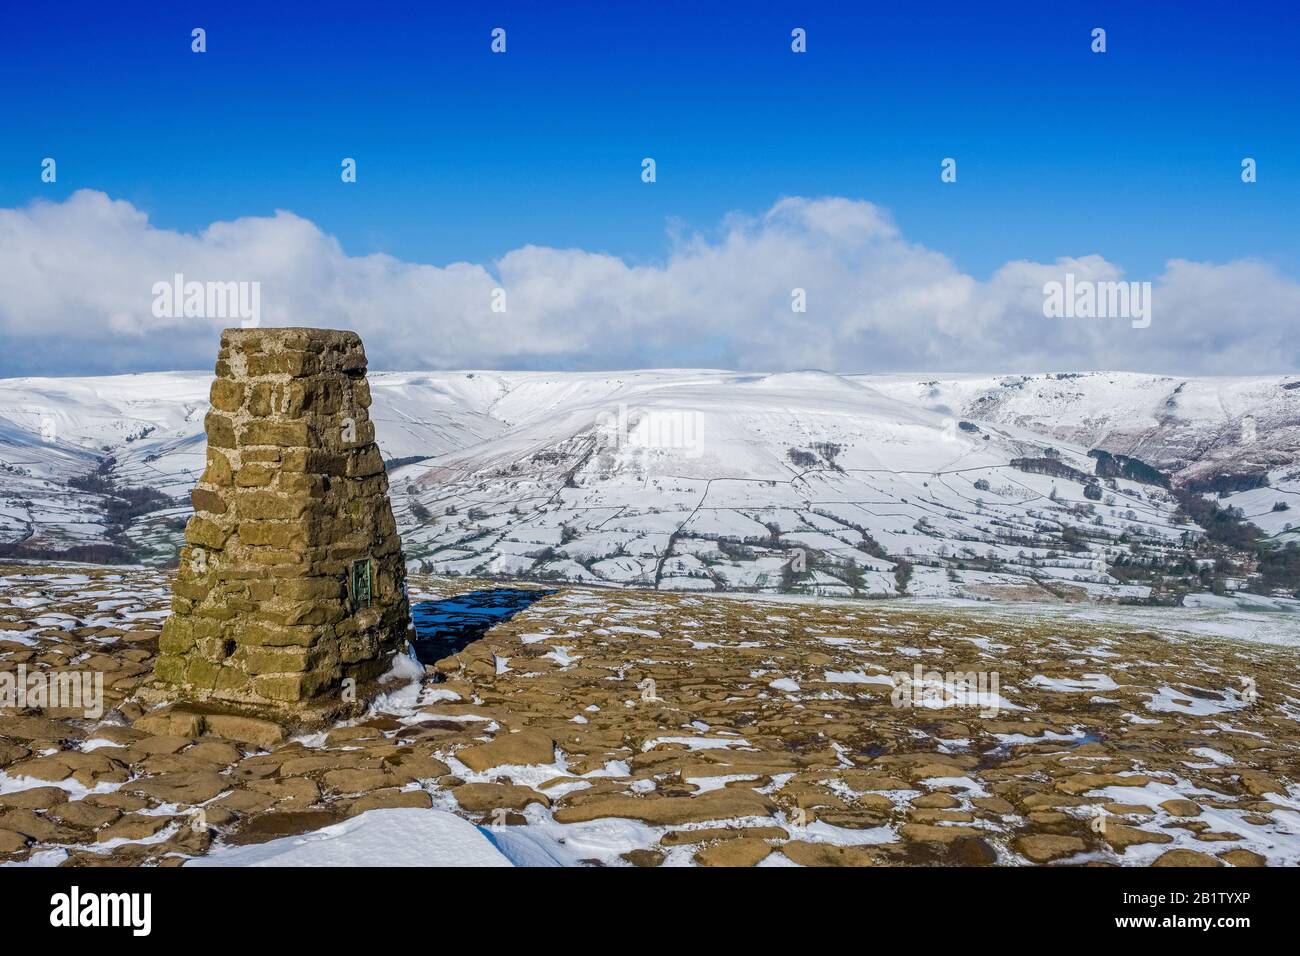 The summit trig point of Mam Tor in the Peak District National Park, with Edale & Kinder Scout in the distance Stock Photo